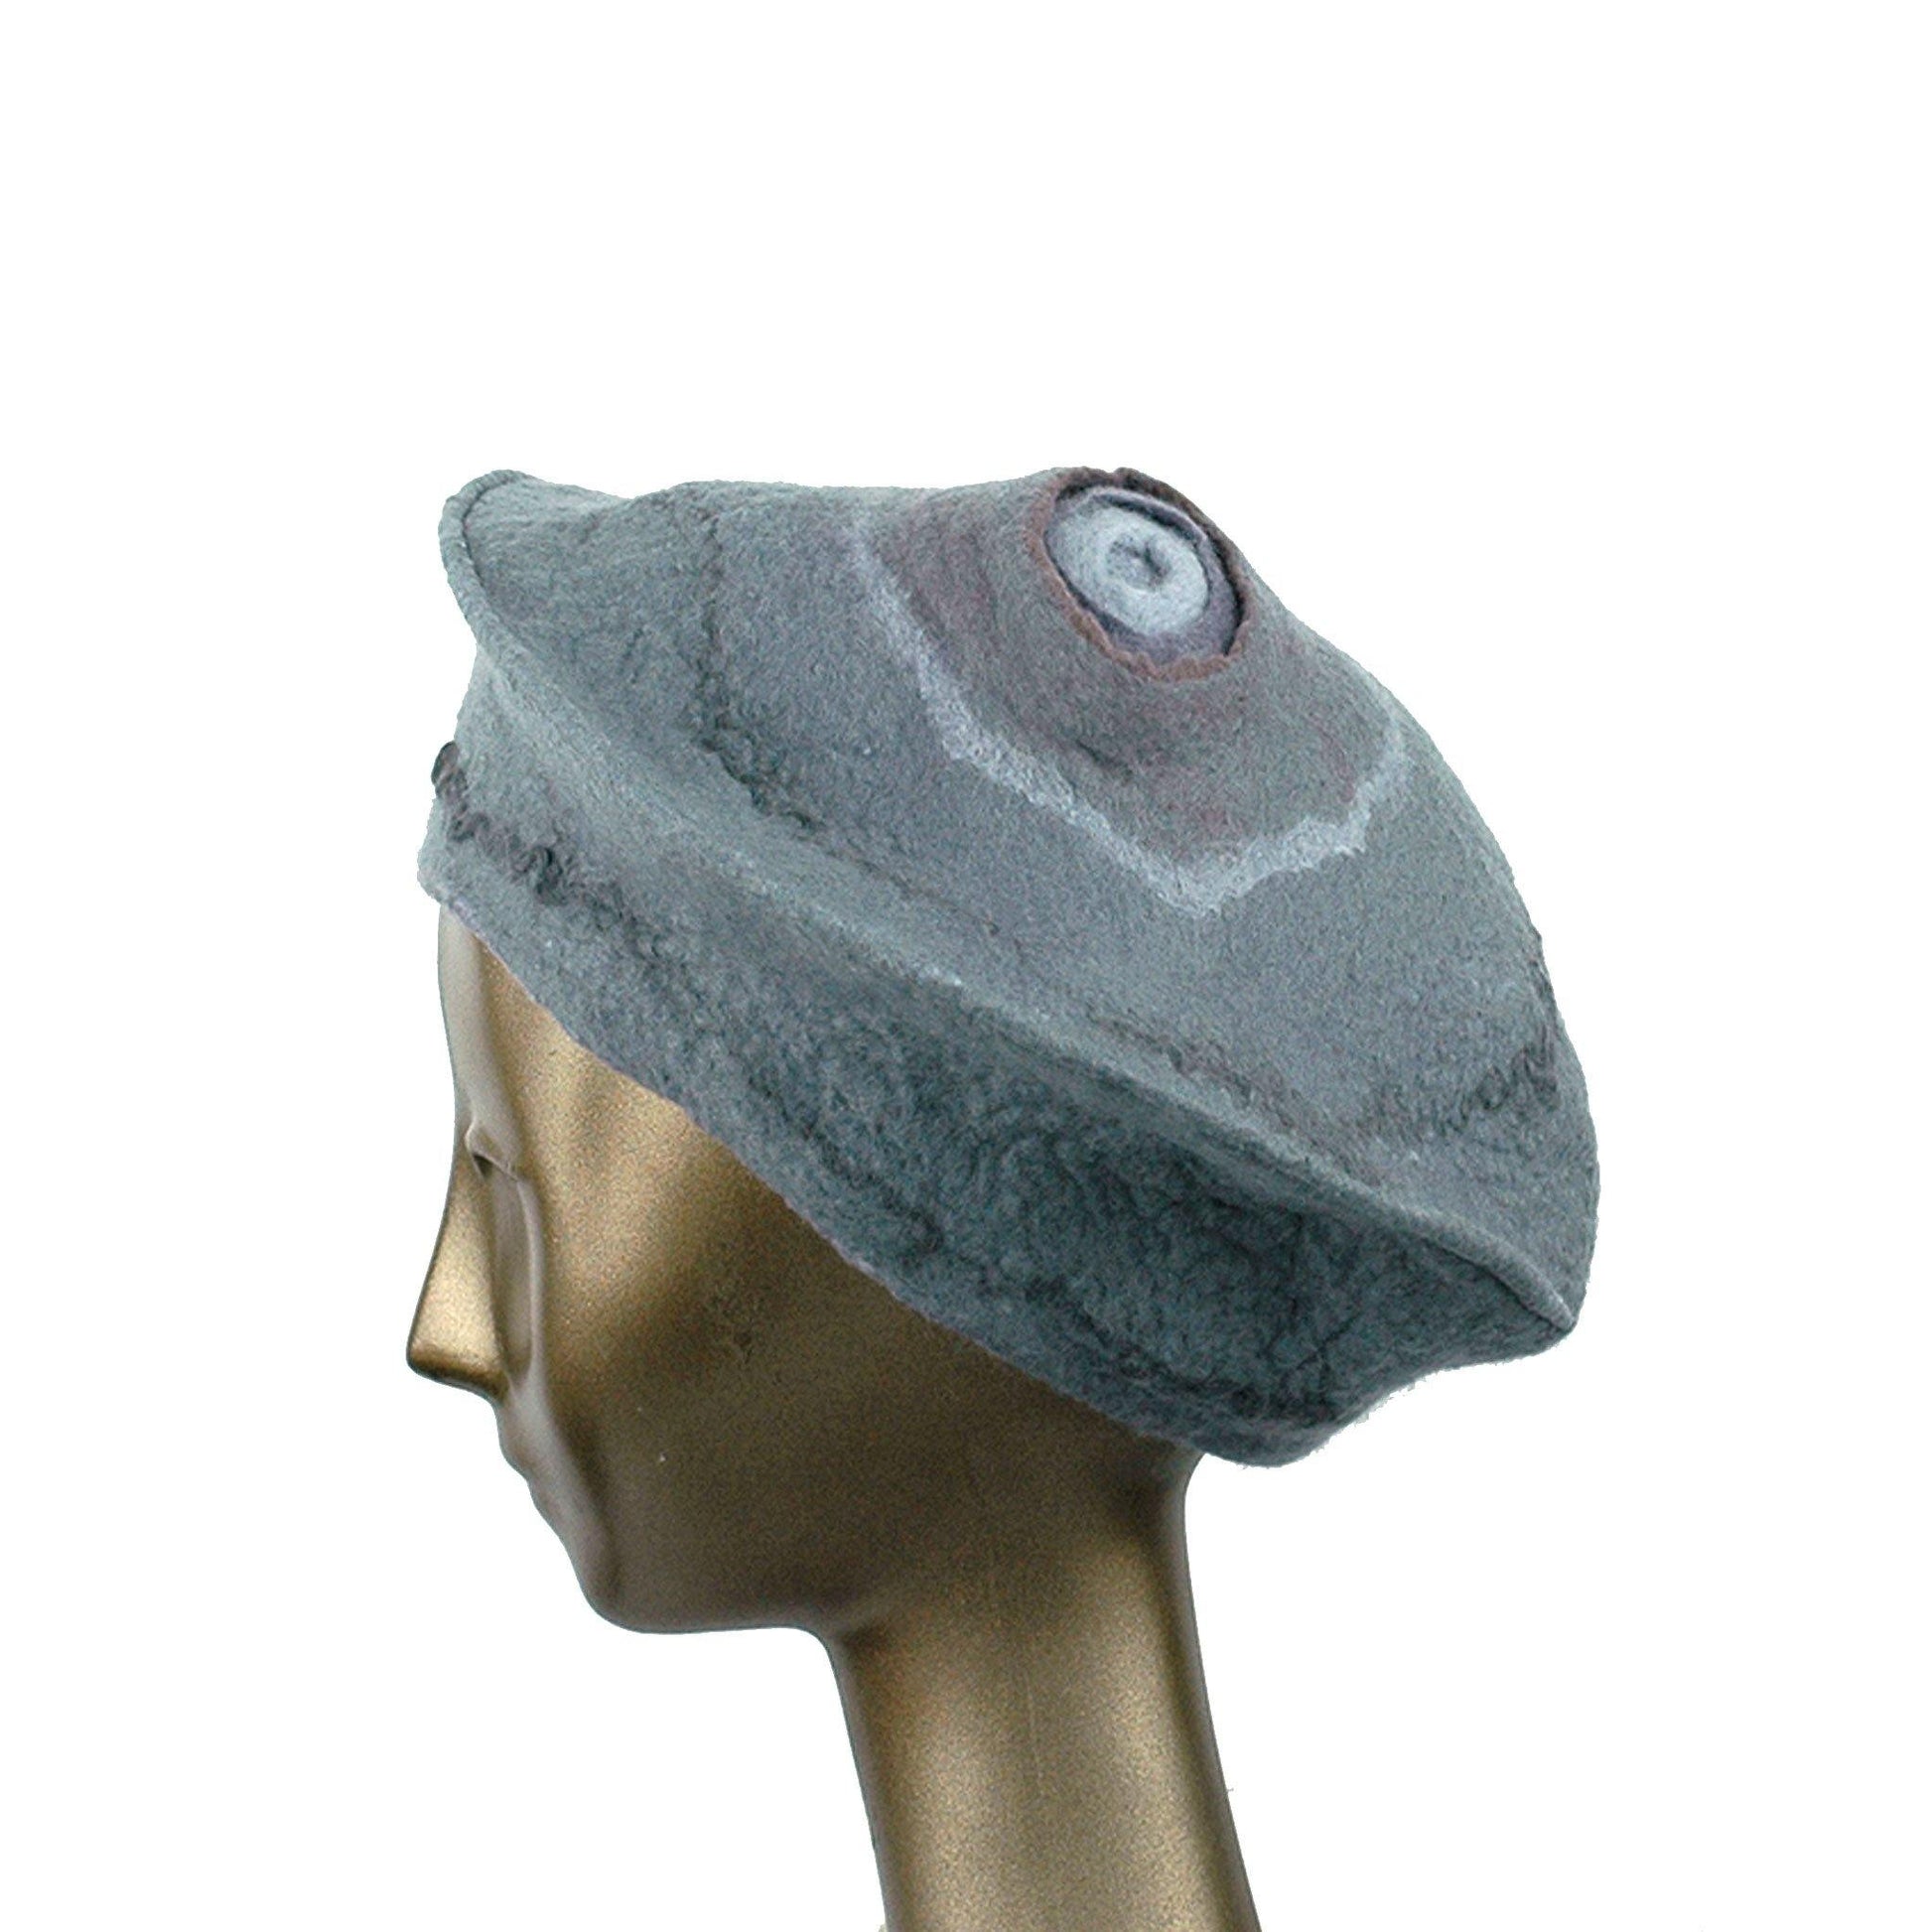 Gray Felted Beret with Crater on Top - side view